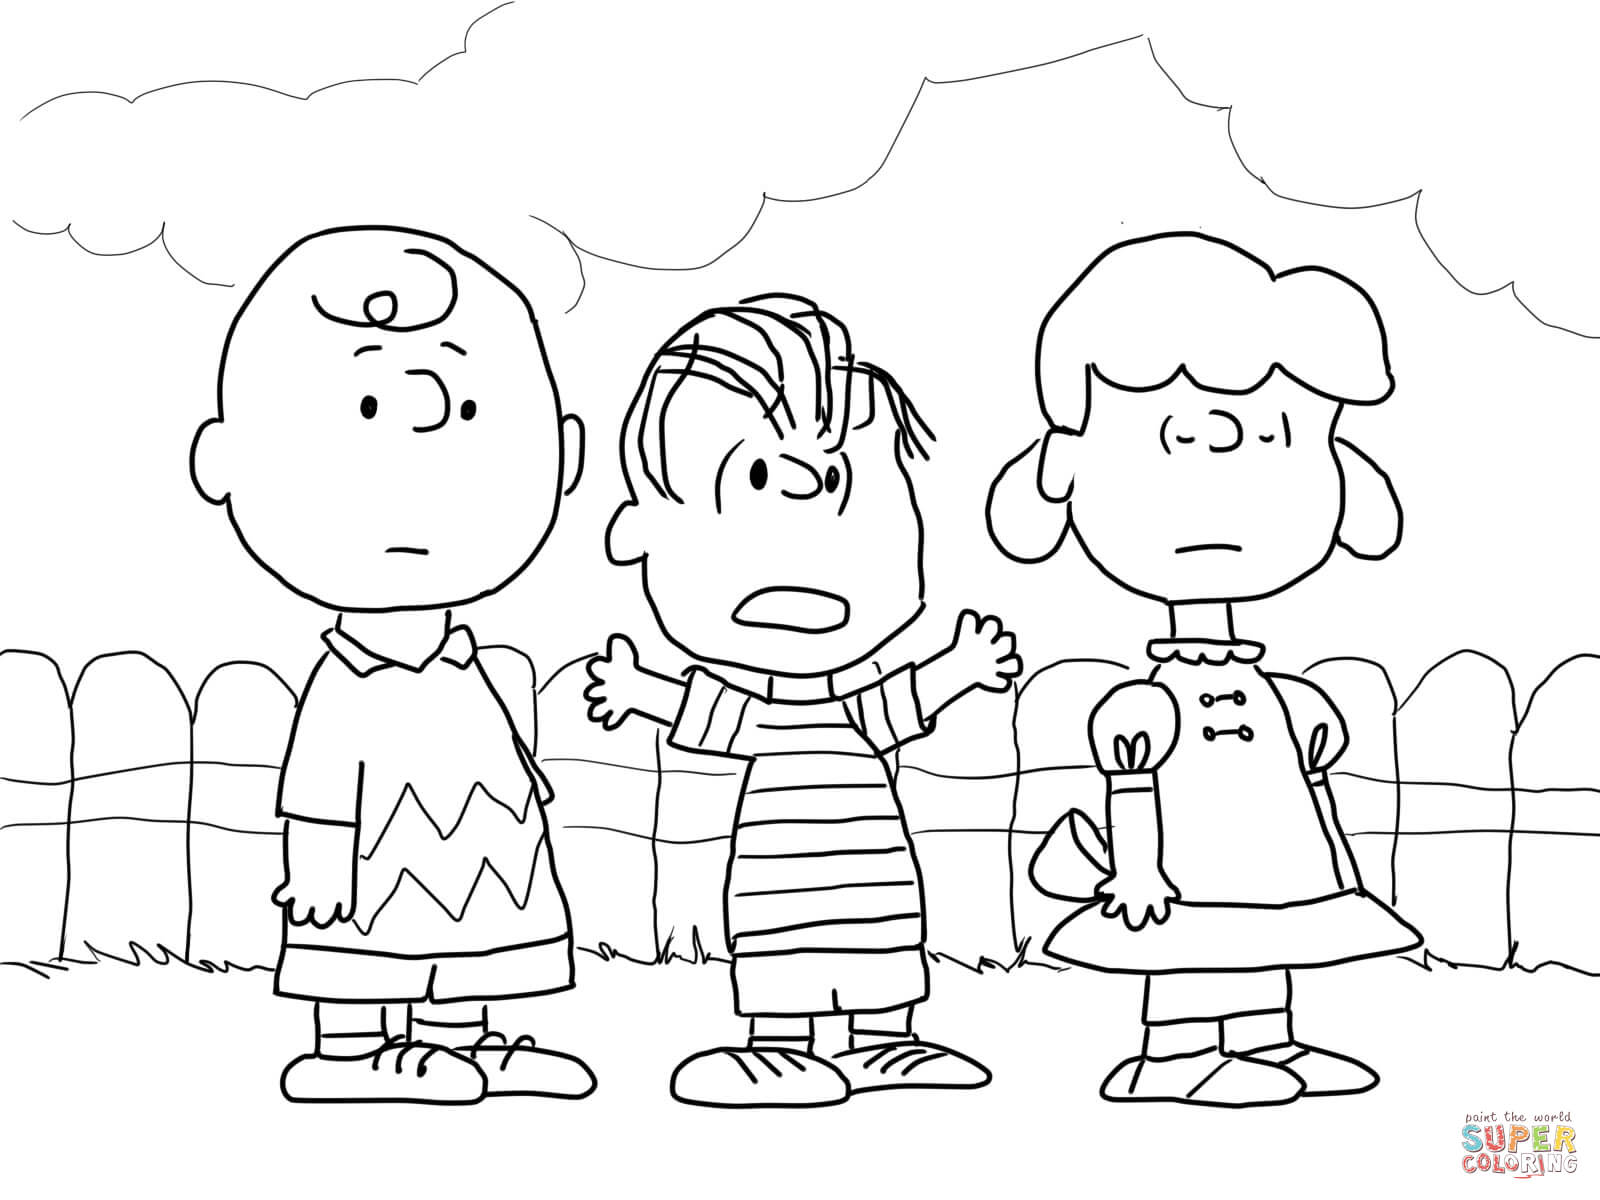 Peanuts Characters Thanksgiving Coloring Pages - Coloring Home1600 x 1200